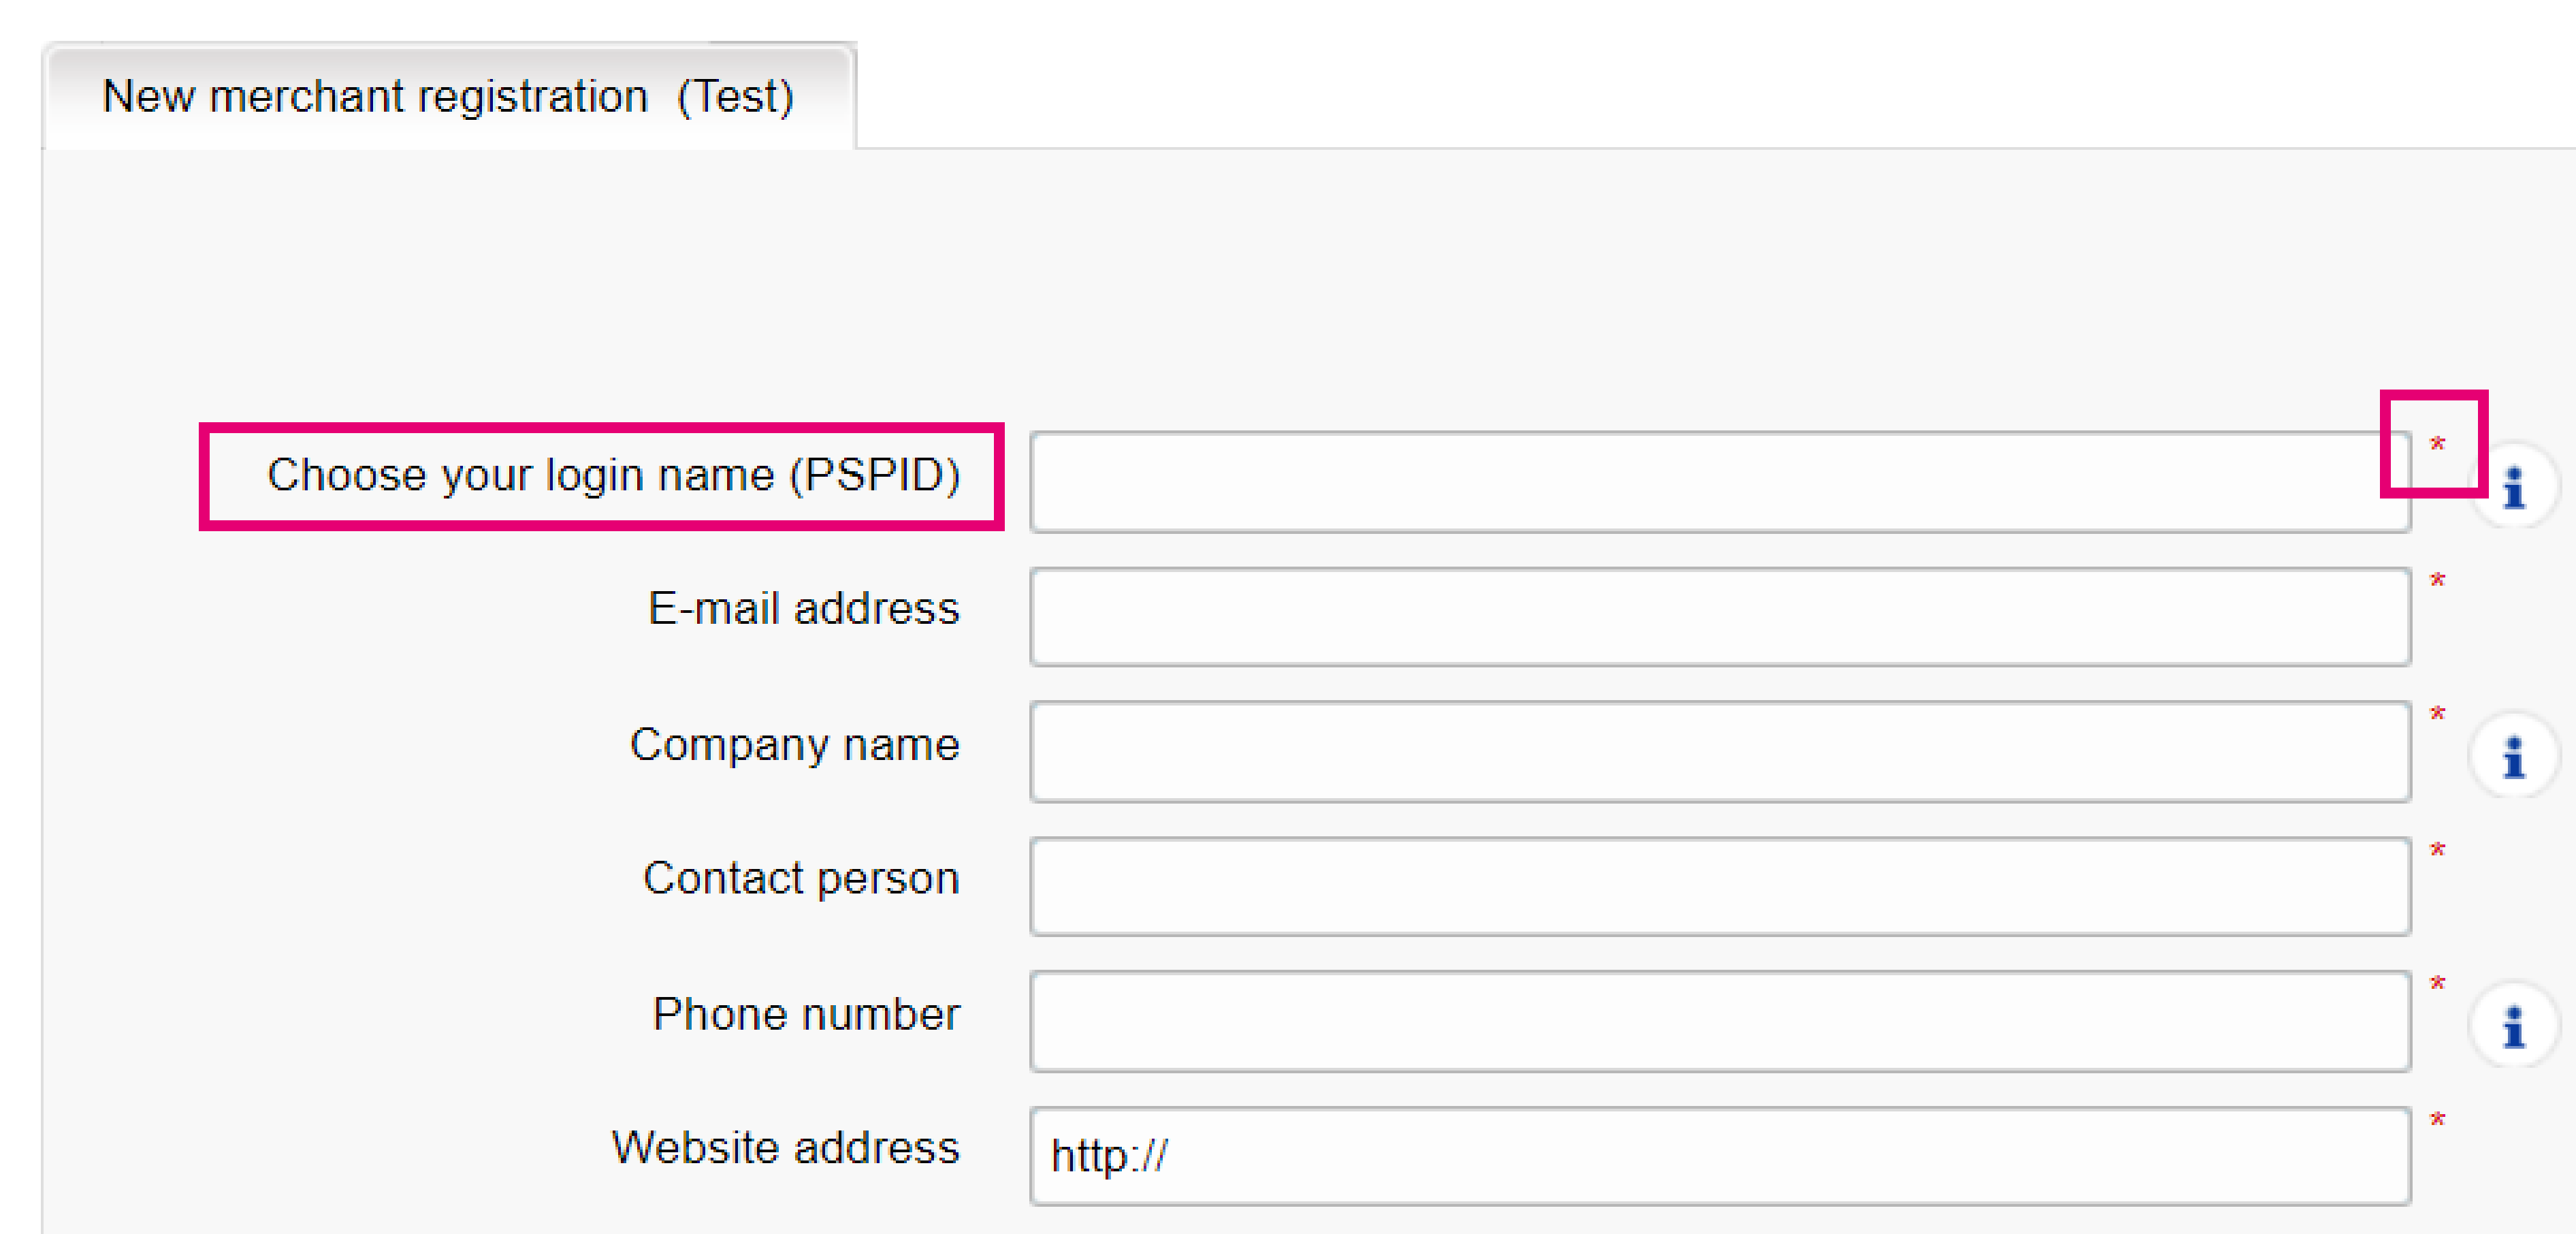 The image above shows the “Choose your login name (PSPID)” field and where to find the “*” (asterisk) marking mandatory fields.